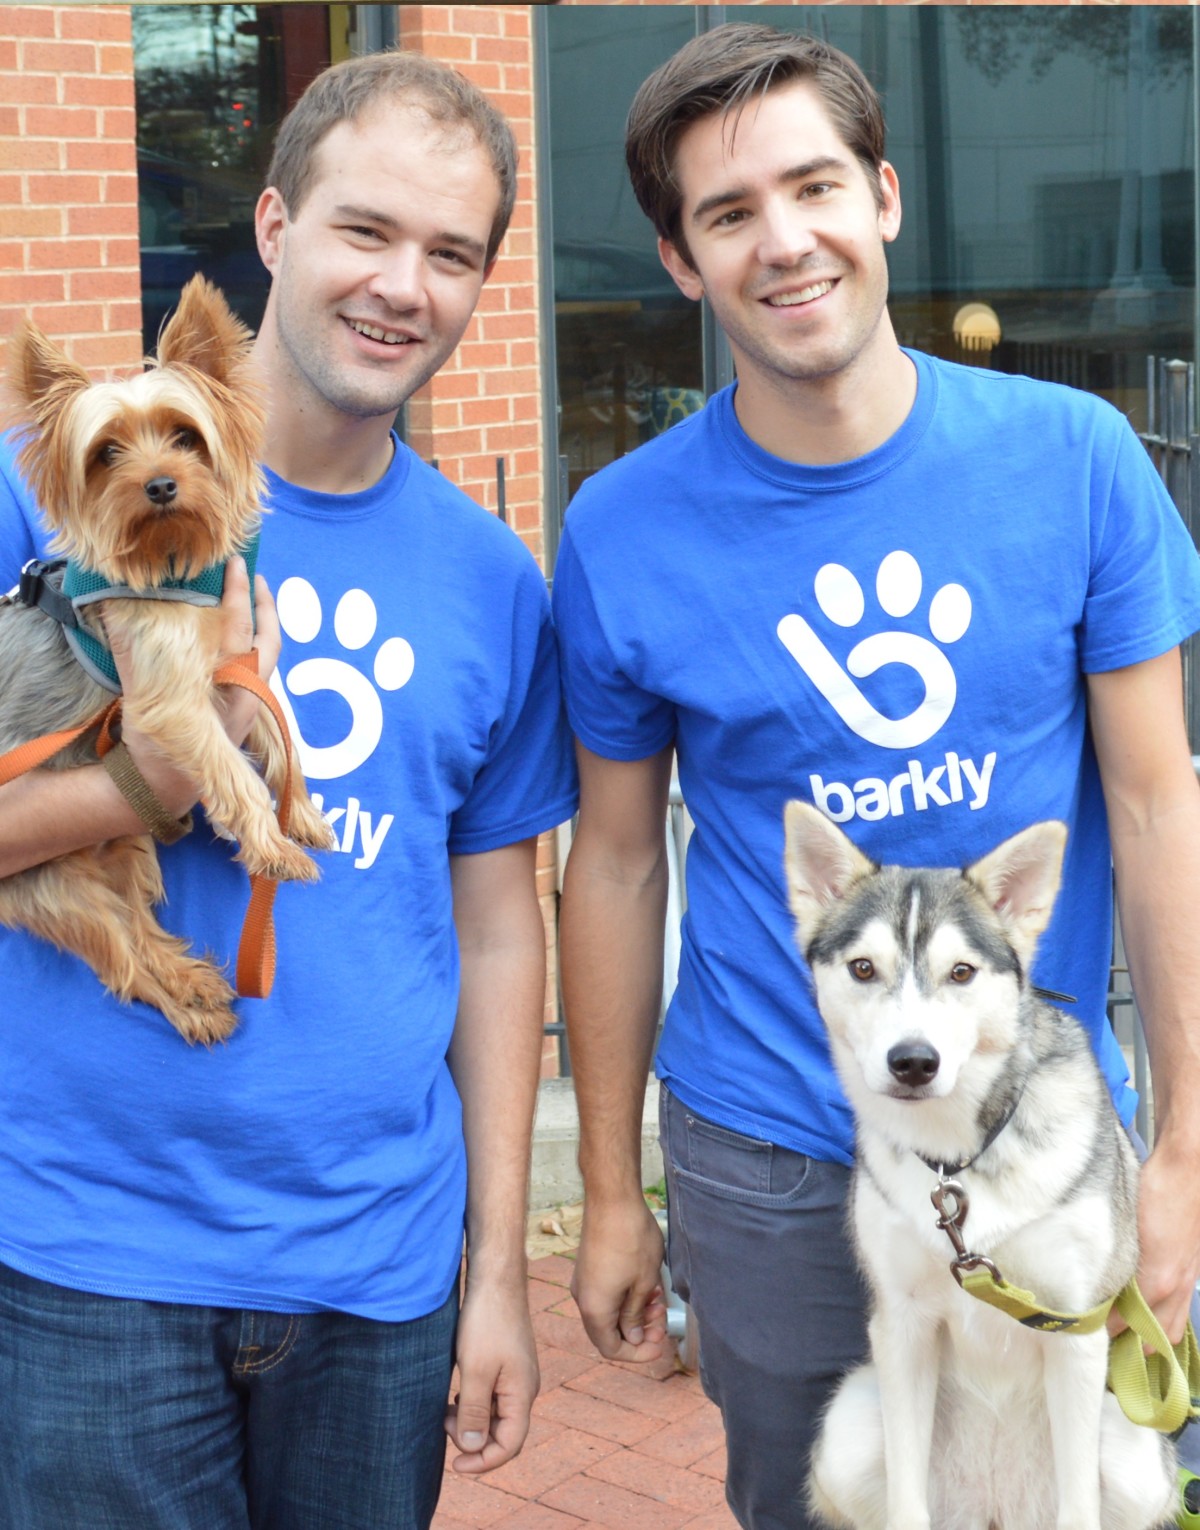 Barkly cofounders Chris Gonzalez and Dave Comiskey (and their dogs).